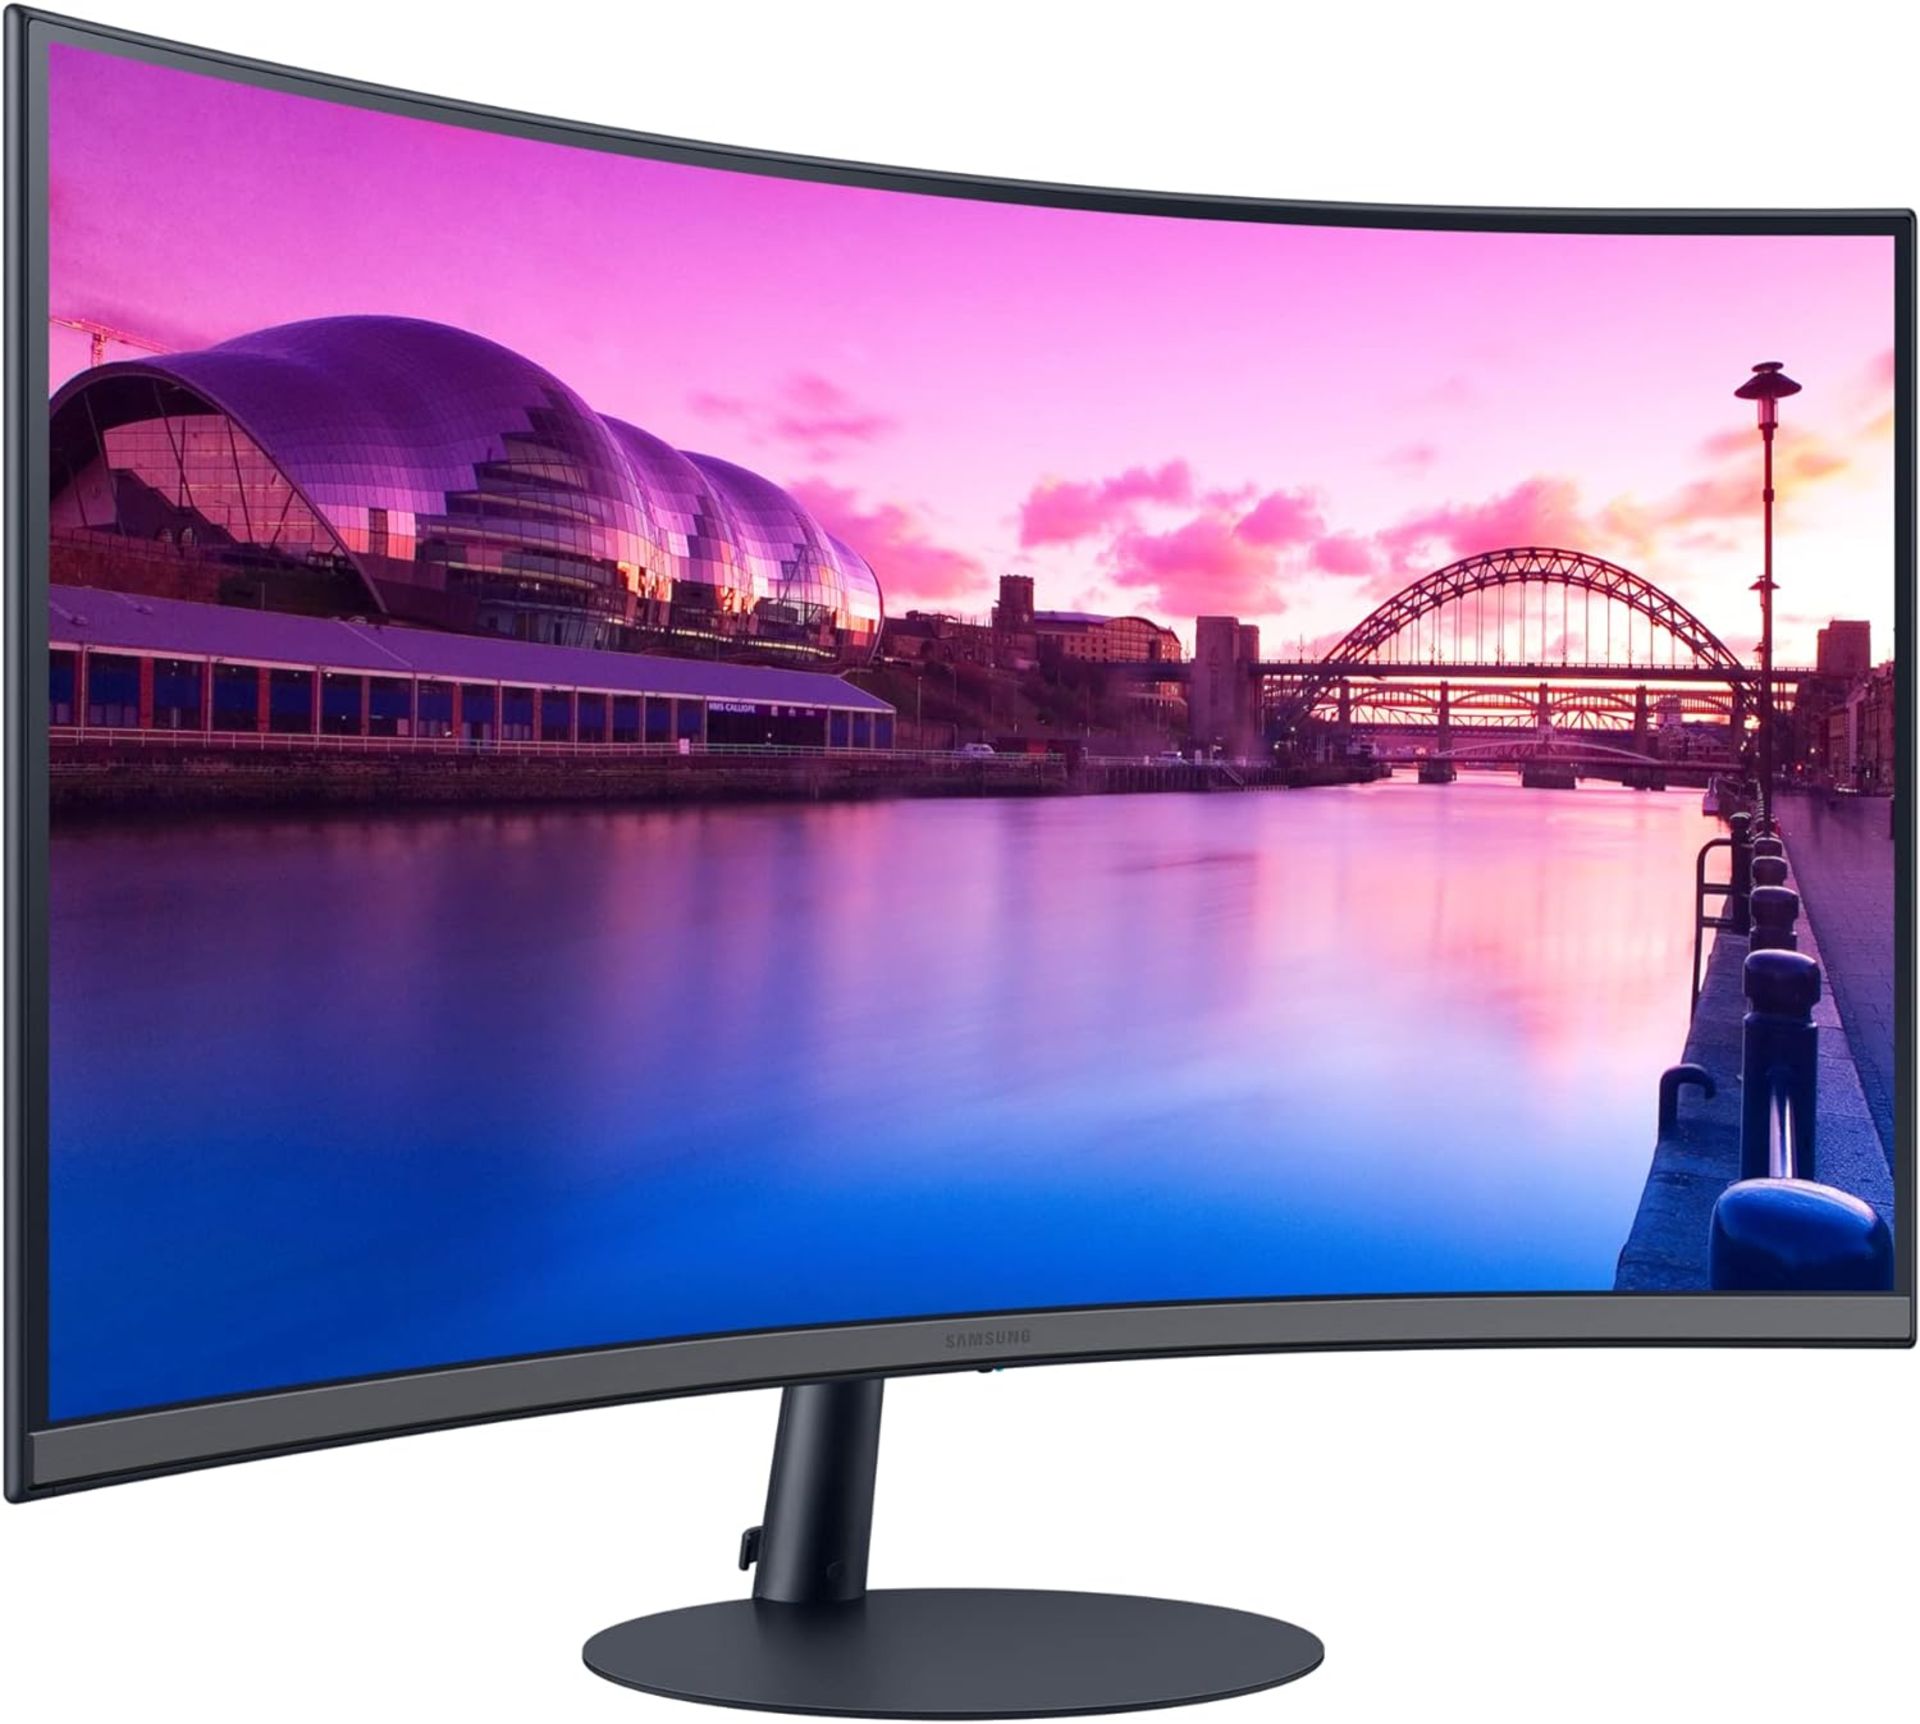 NEW & BOXED SAMSUNG S27C390EAU 27 Inch 75Hz Curved FHD Monitor. RRP £199. (R15). 27in LED display. - Image 6 of 8